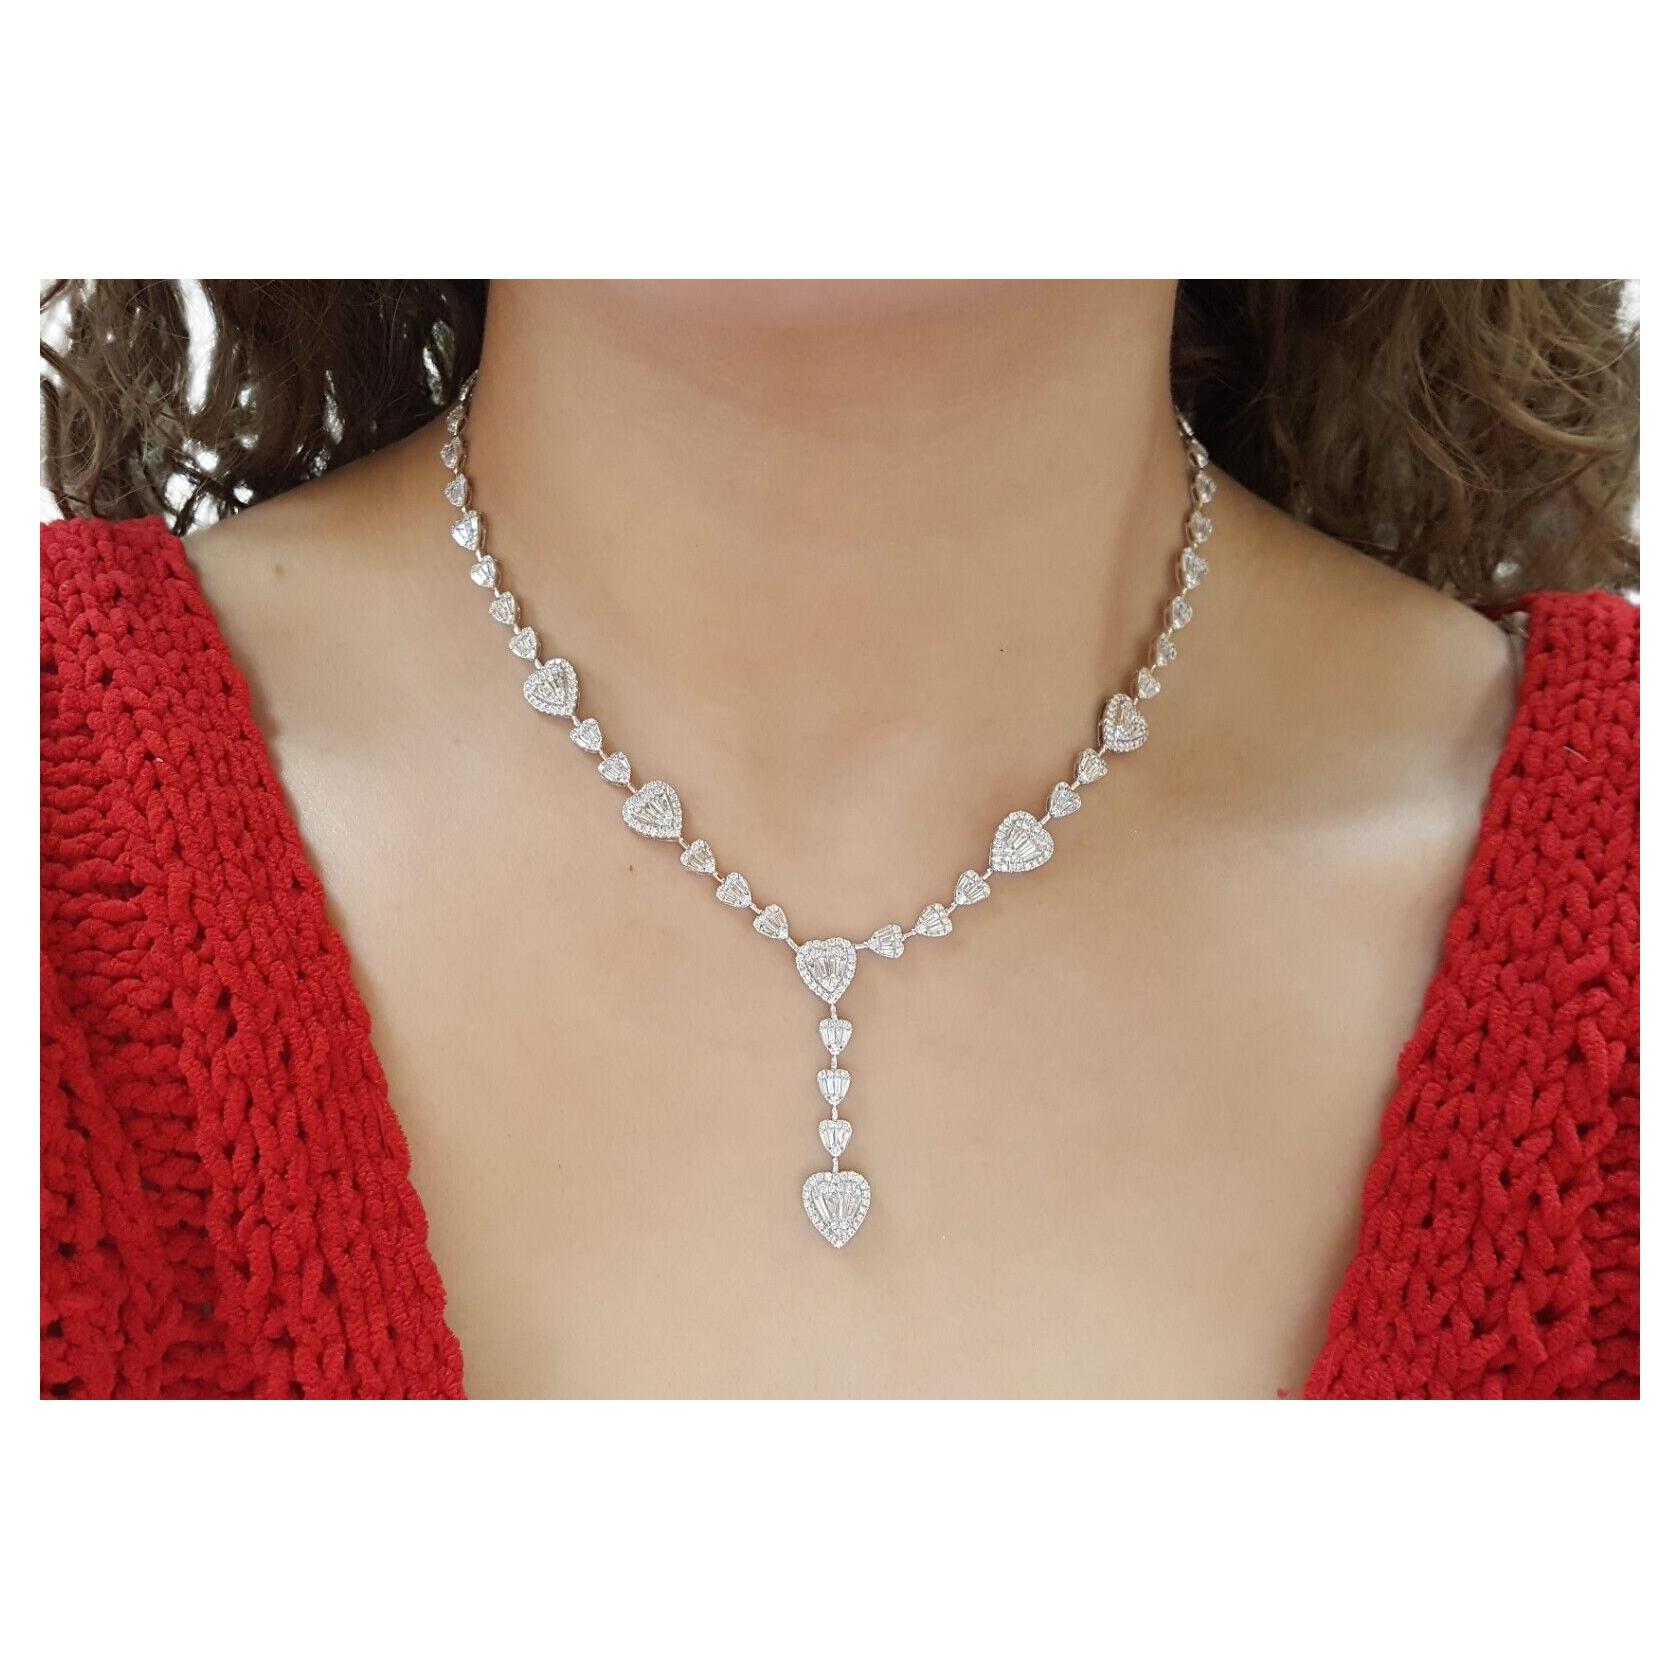 Authentic 18K White Gold Unisex 7.03 ct Total Weight Round Brilliant & Baguette Cut Diamonds Heart Shape Halo Drop/Dangle Lariat Necklace.

The necklace weighs 20 grams, 15.75